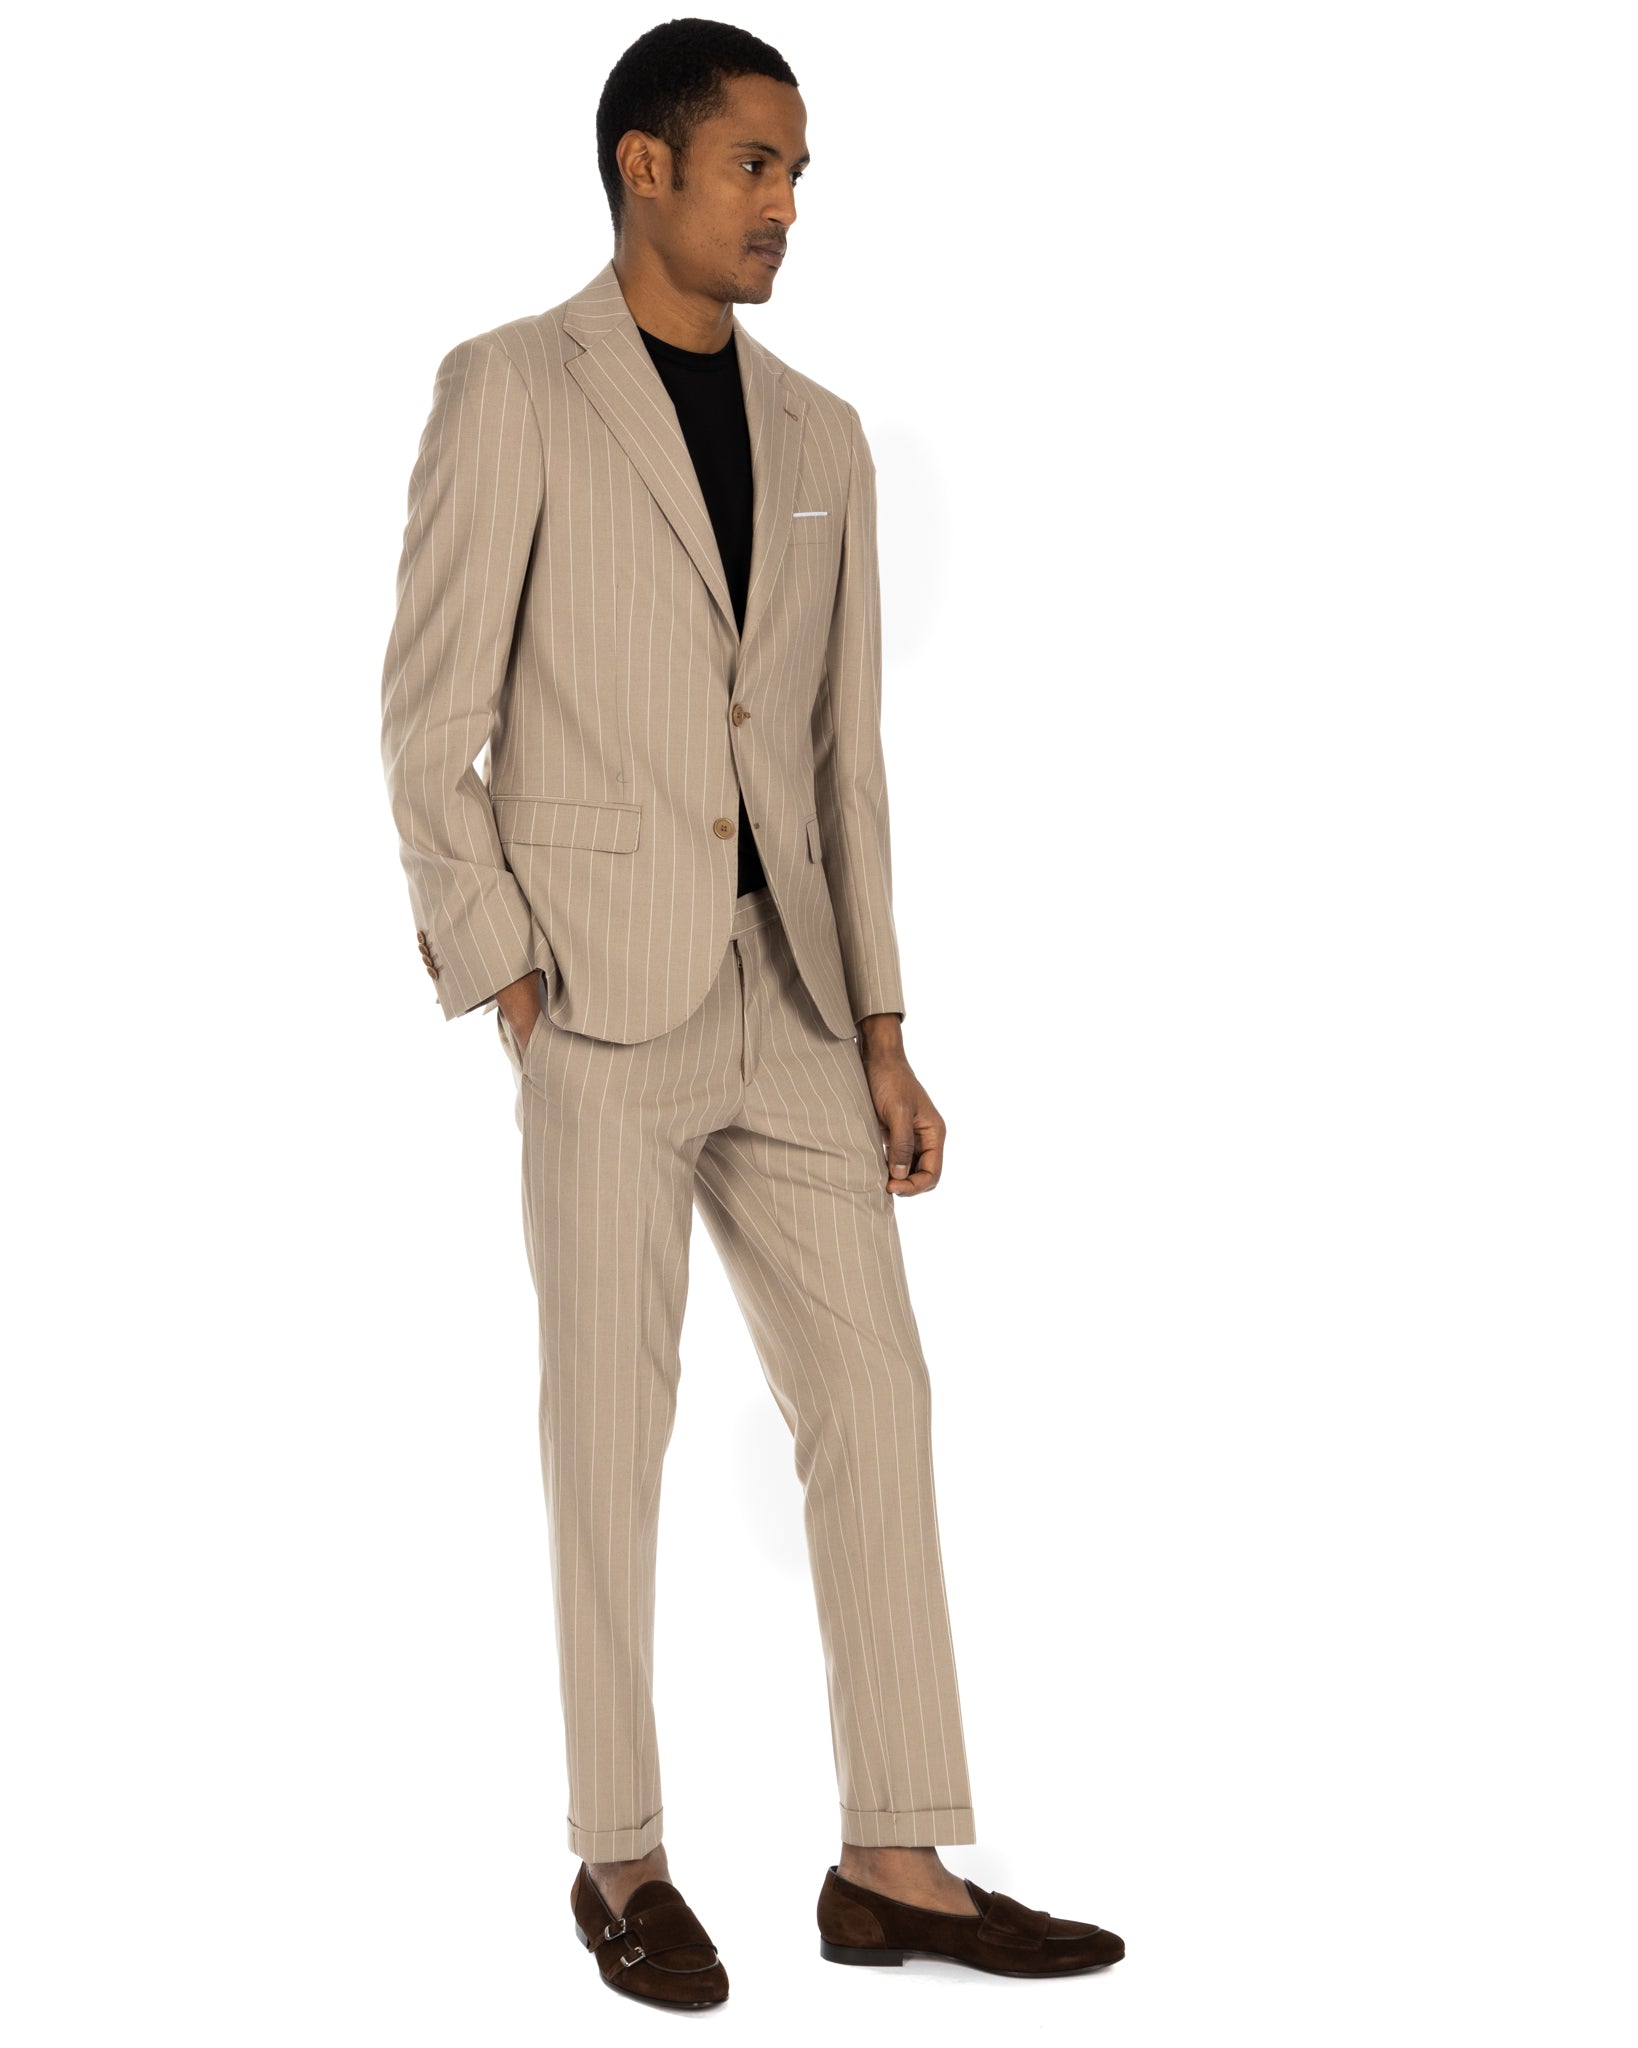 Lille - costume simple boutonnage beige à fines rayures